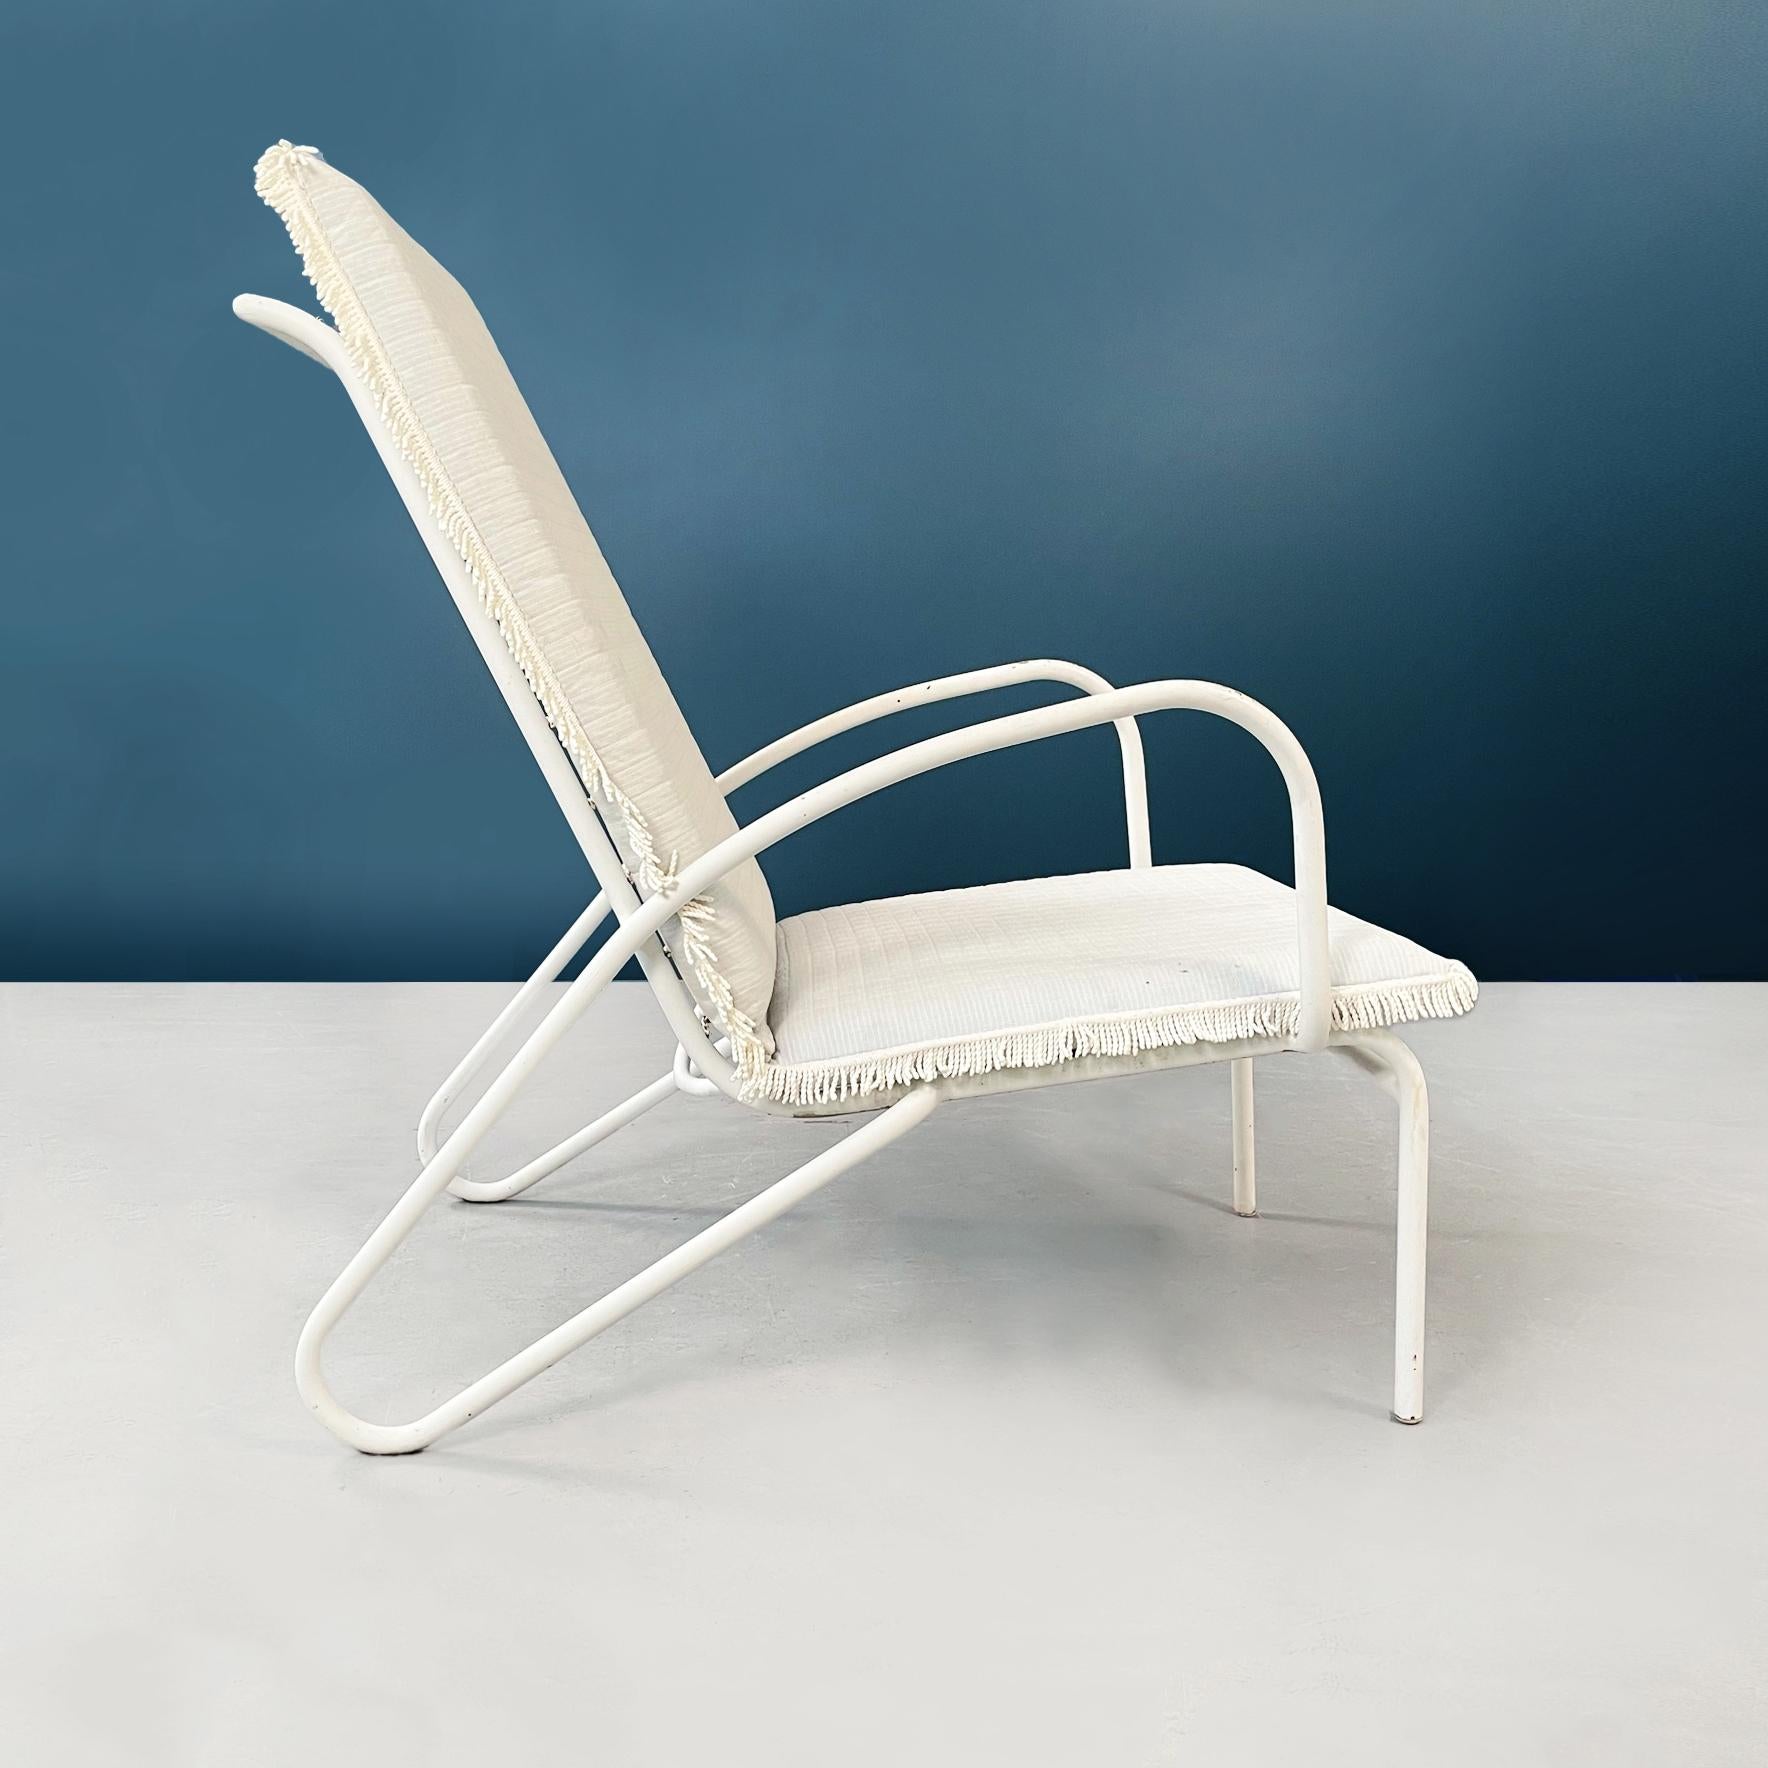 Italian Mid-Century White Iron Garden Armchairs with Fabric Cushions, 1960s In Good Condition For Sale In MIlano, IT